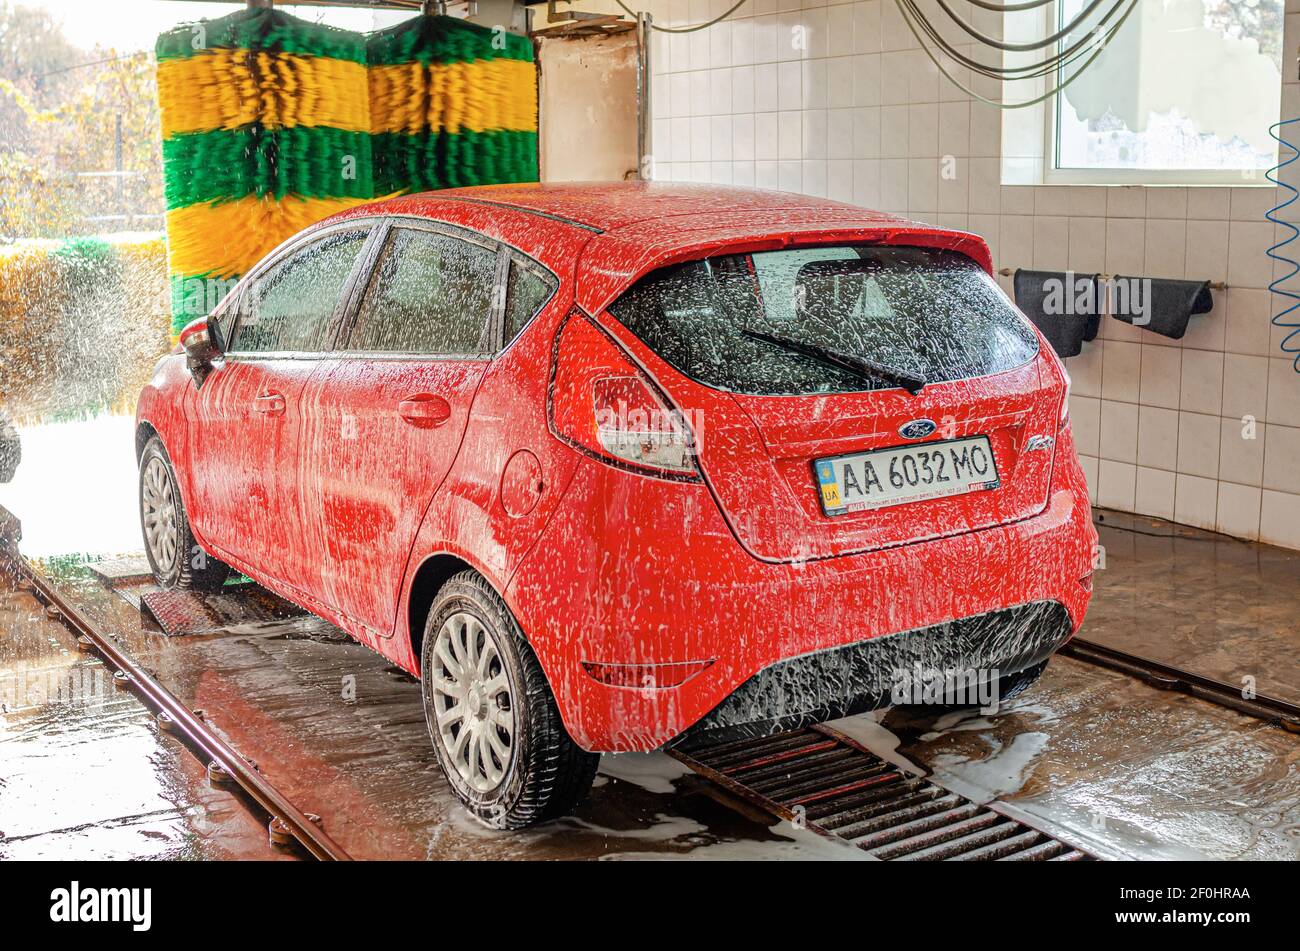 Red car at an automatic car wash. Stock Photo